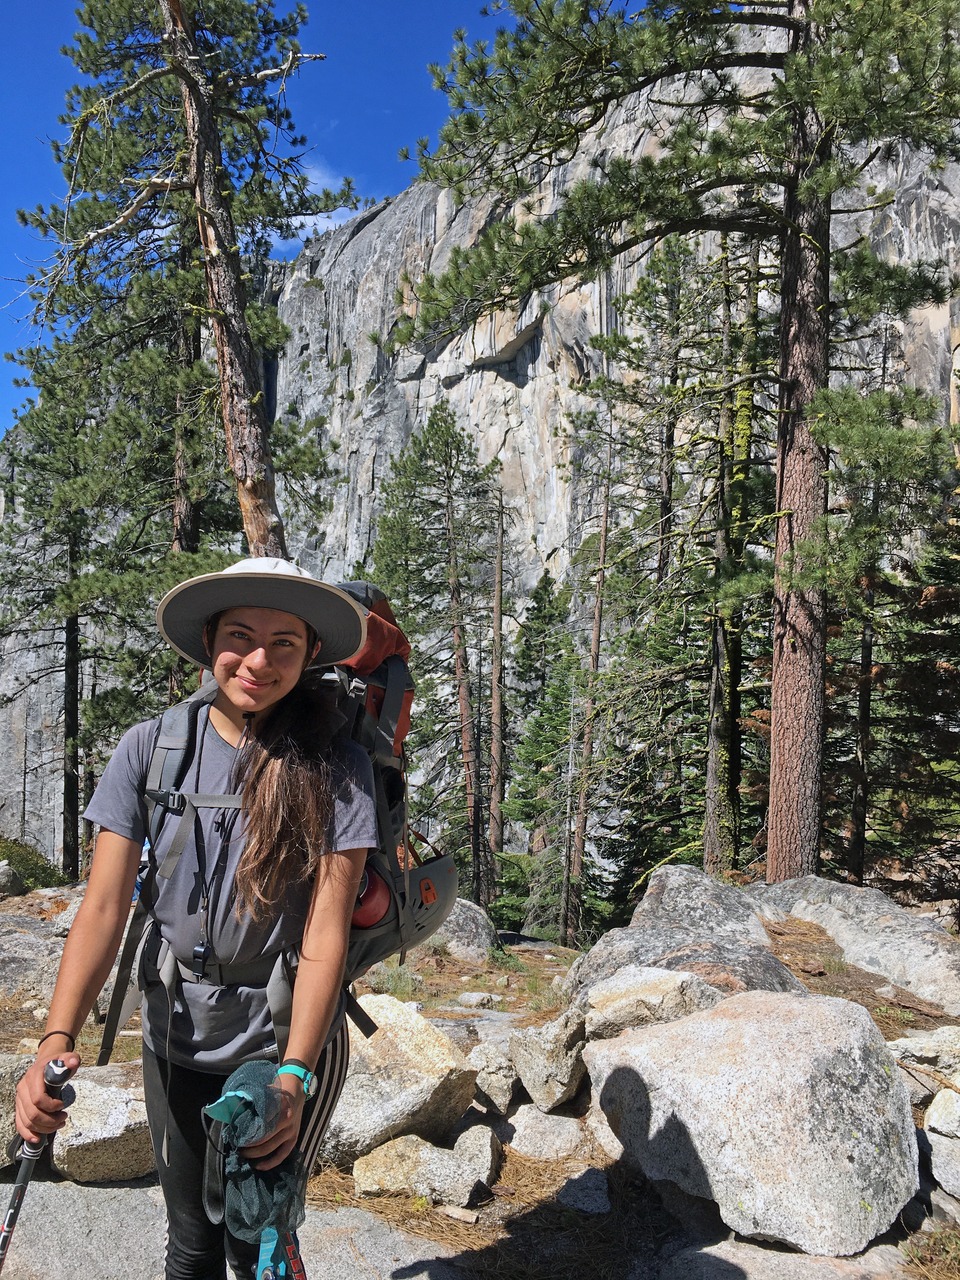 A 2020 Adventure Risk Challenge student smiles for a photo during a backpacking trip in the Yosemite Wilderness, with tall trees and granite in the background. Photo: Courtesy of Adventure Risk Challenge.